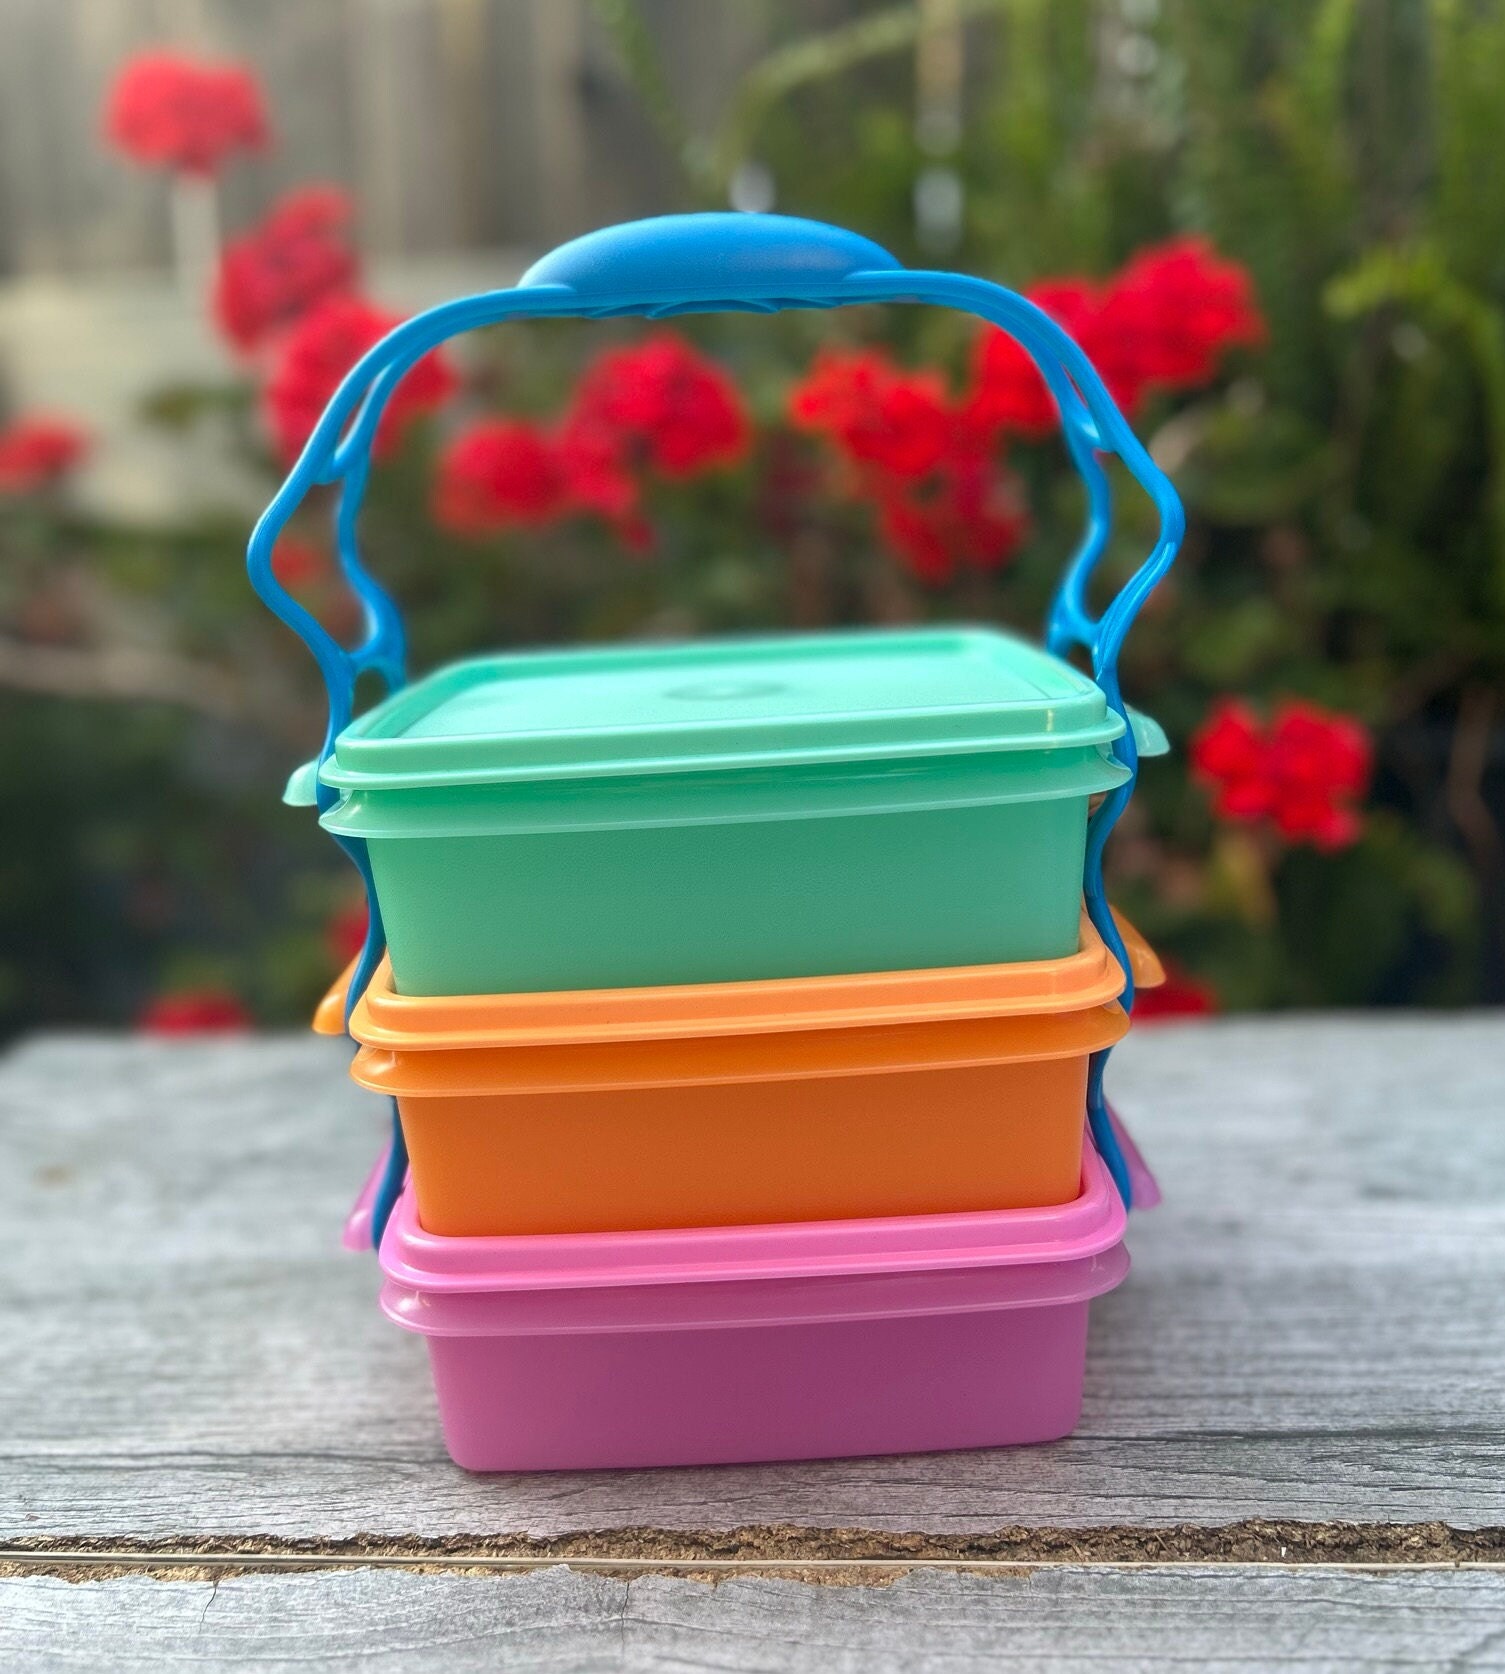 Tupperware Square-Away Stackable Picnic pack~ Square Away w/ Carry Handle